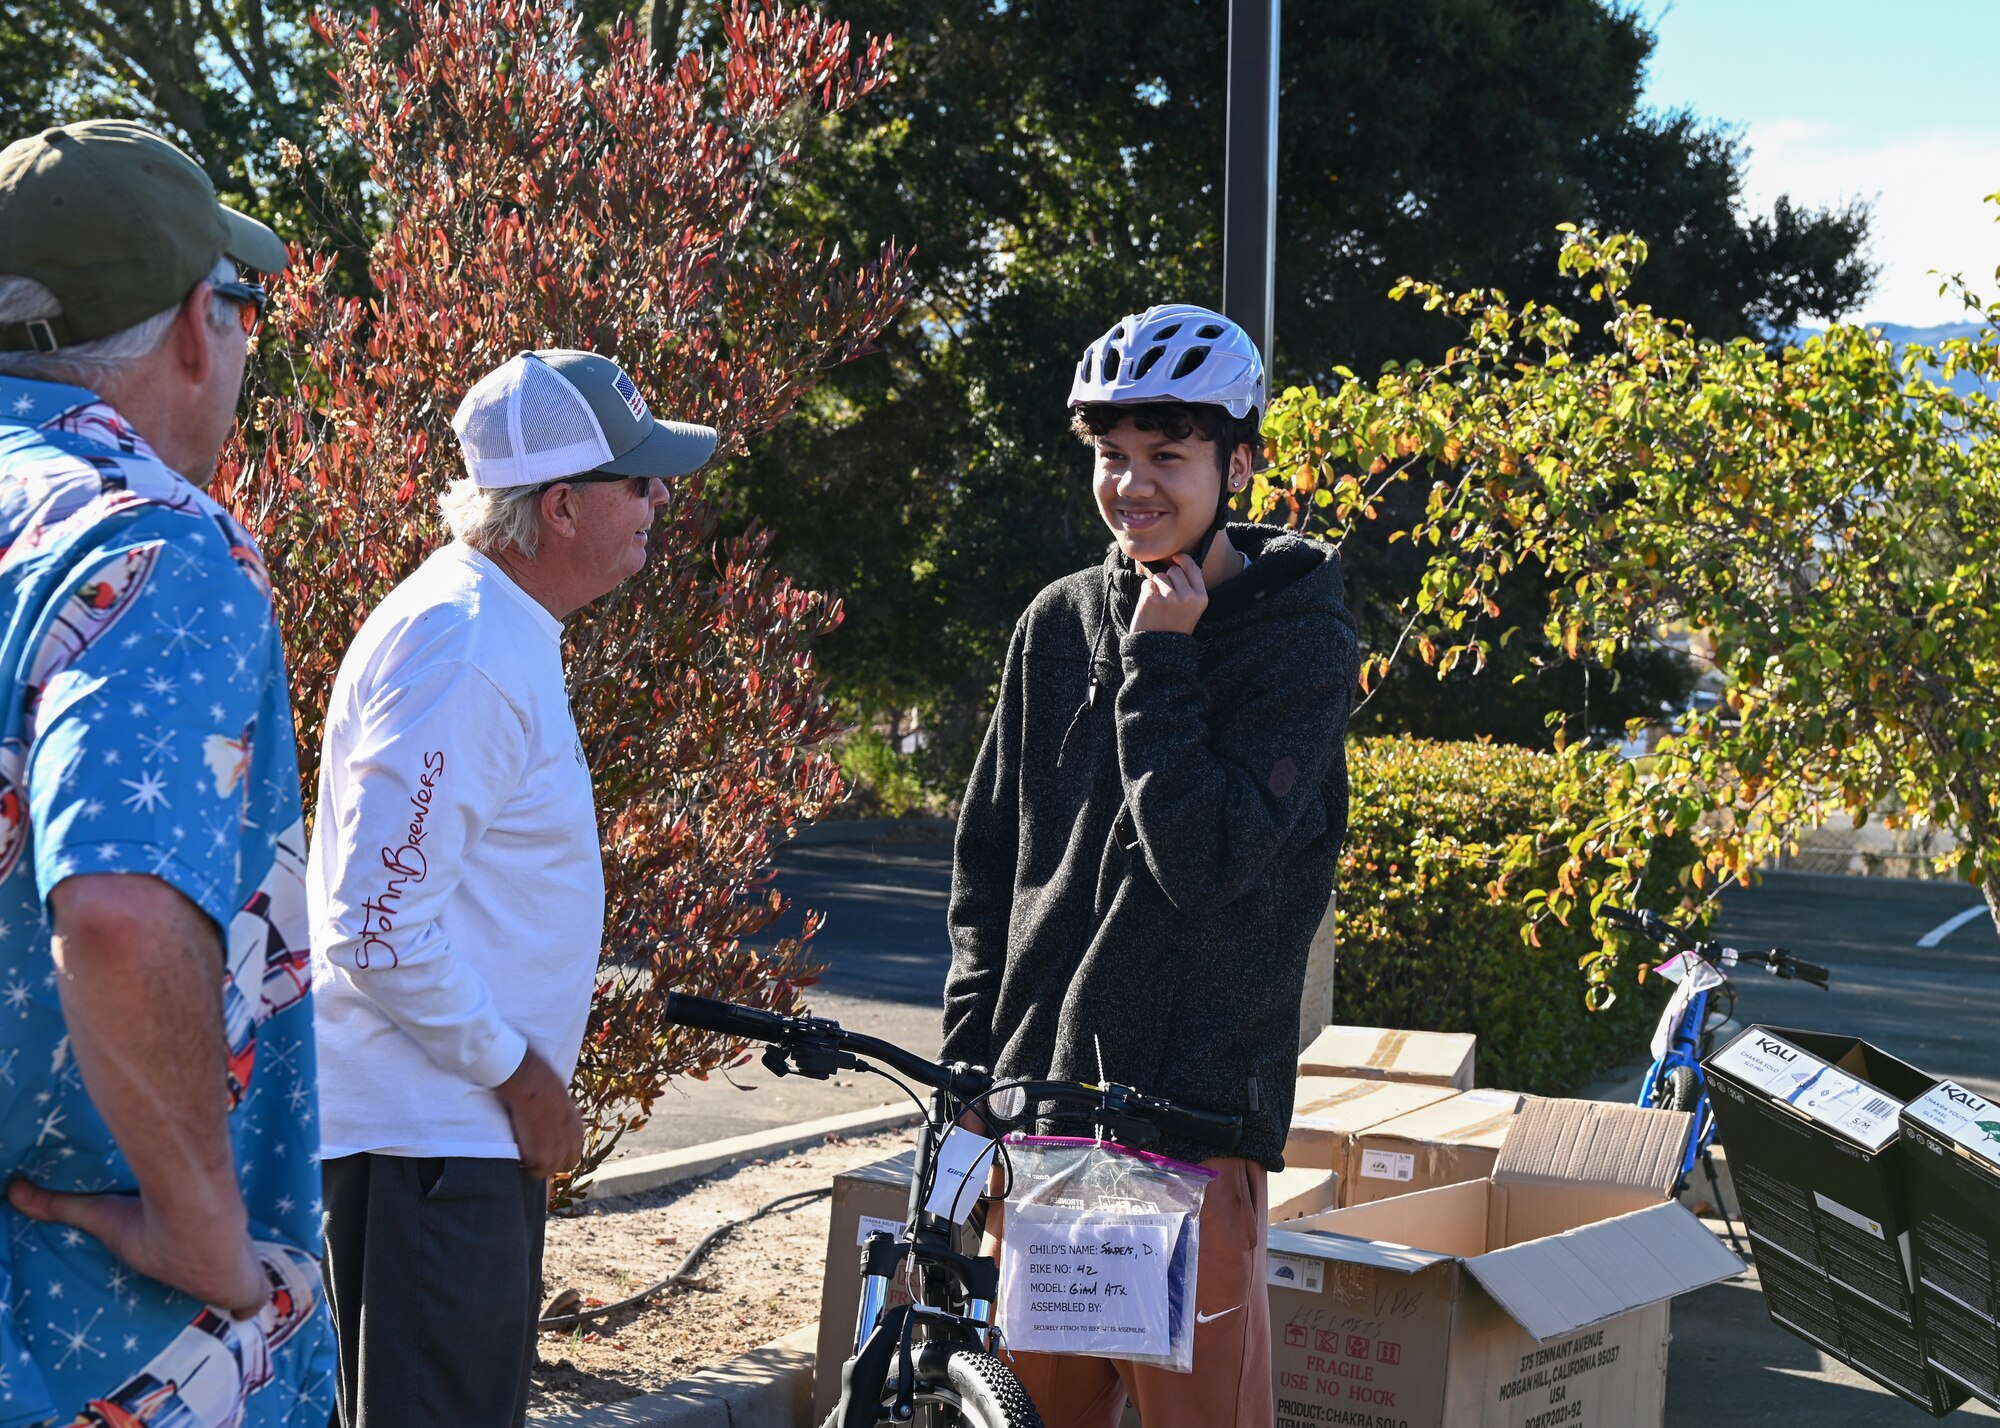 Members of the Village Dirtbags participate in helping children pick out their helmets during the Holiday Bike Give Away in Lompoc.